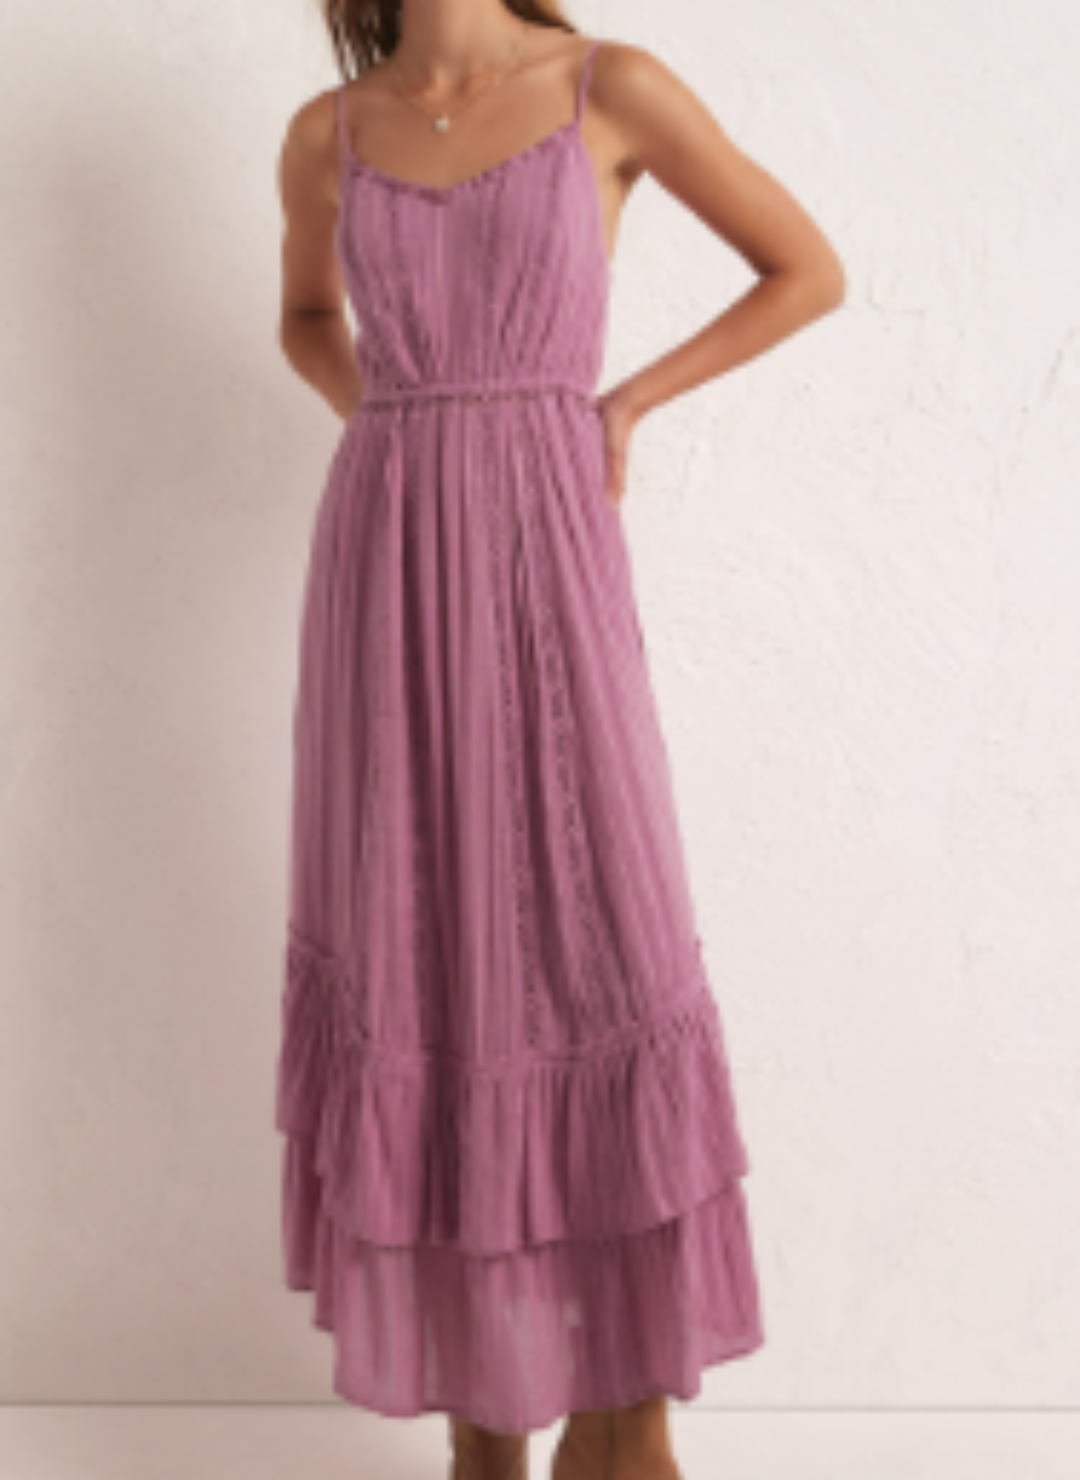 Full size view of ZS Rose Maxi Dress. Model is standing in front of white background.